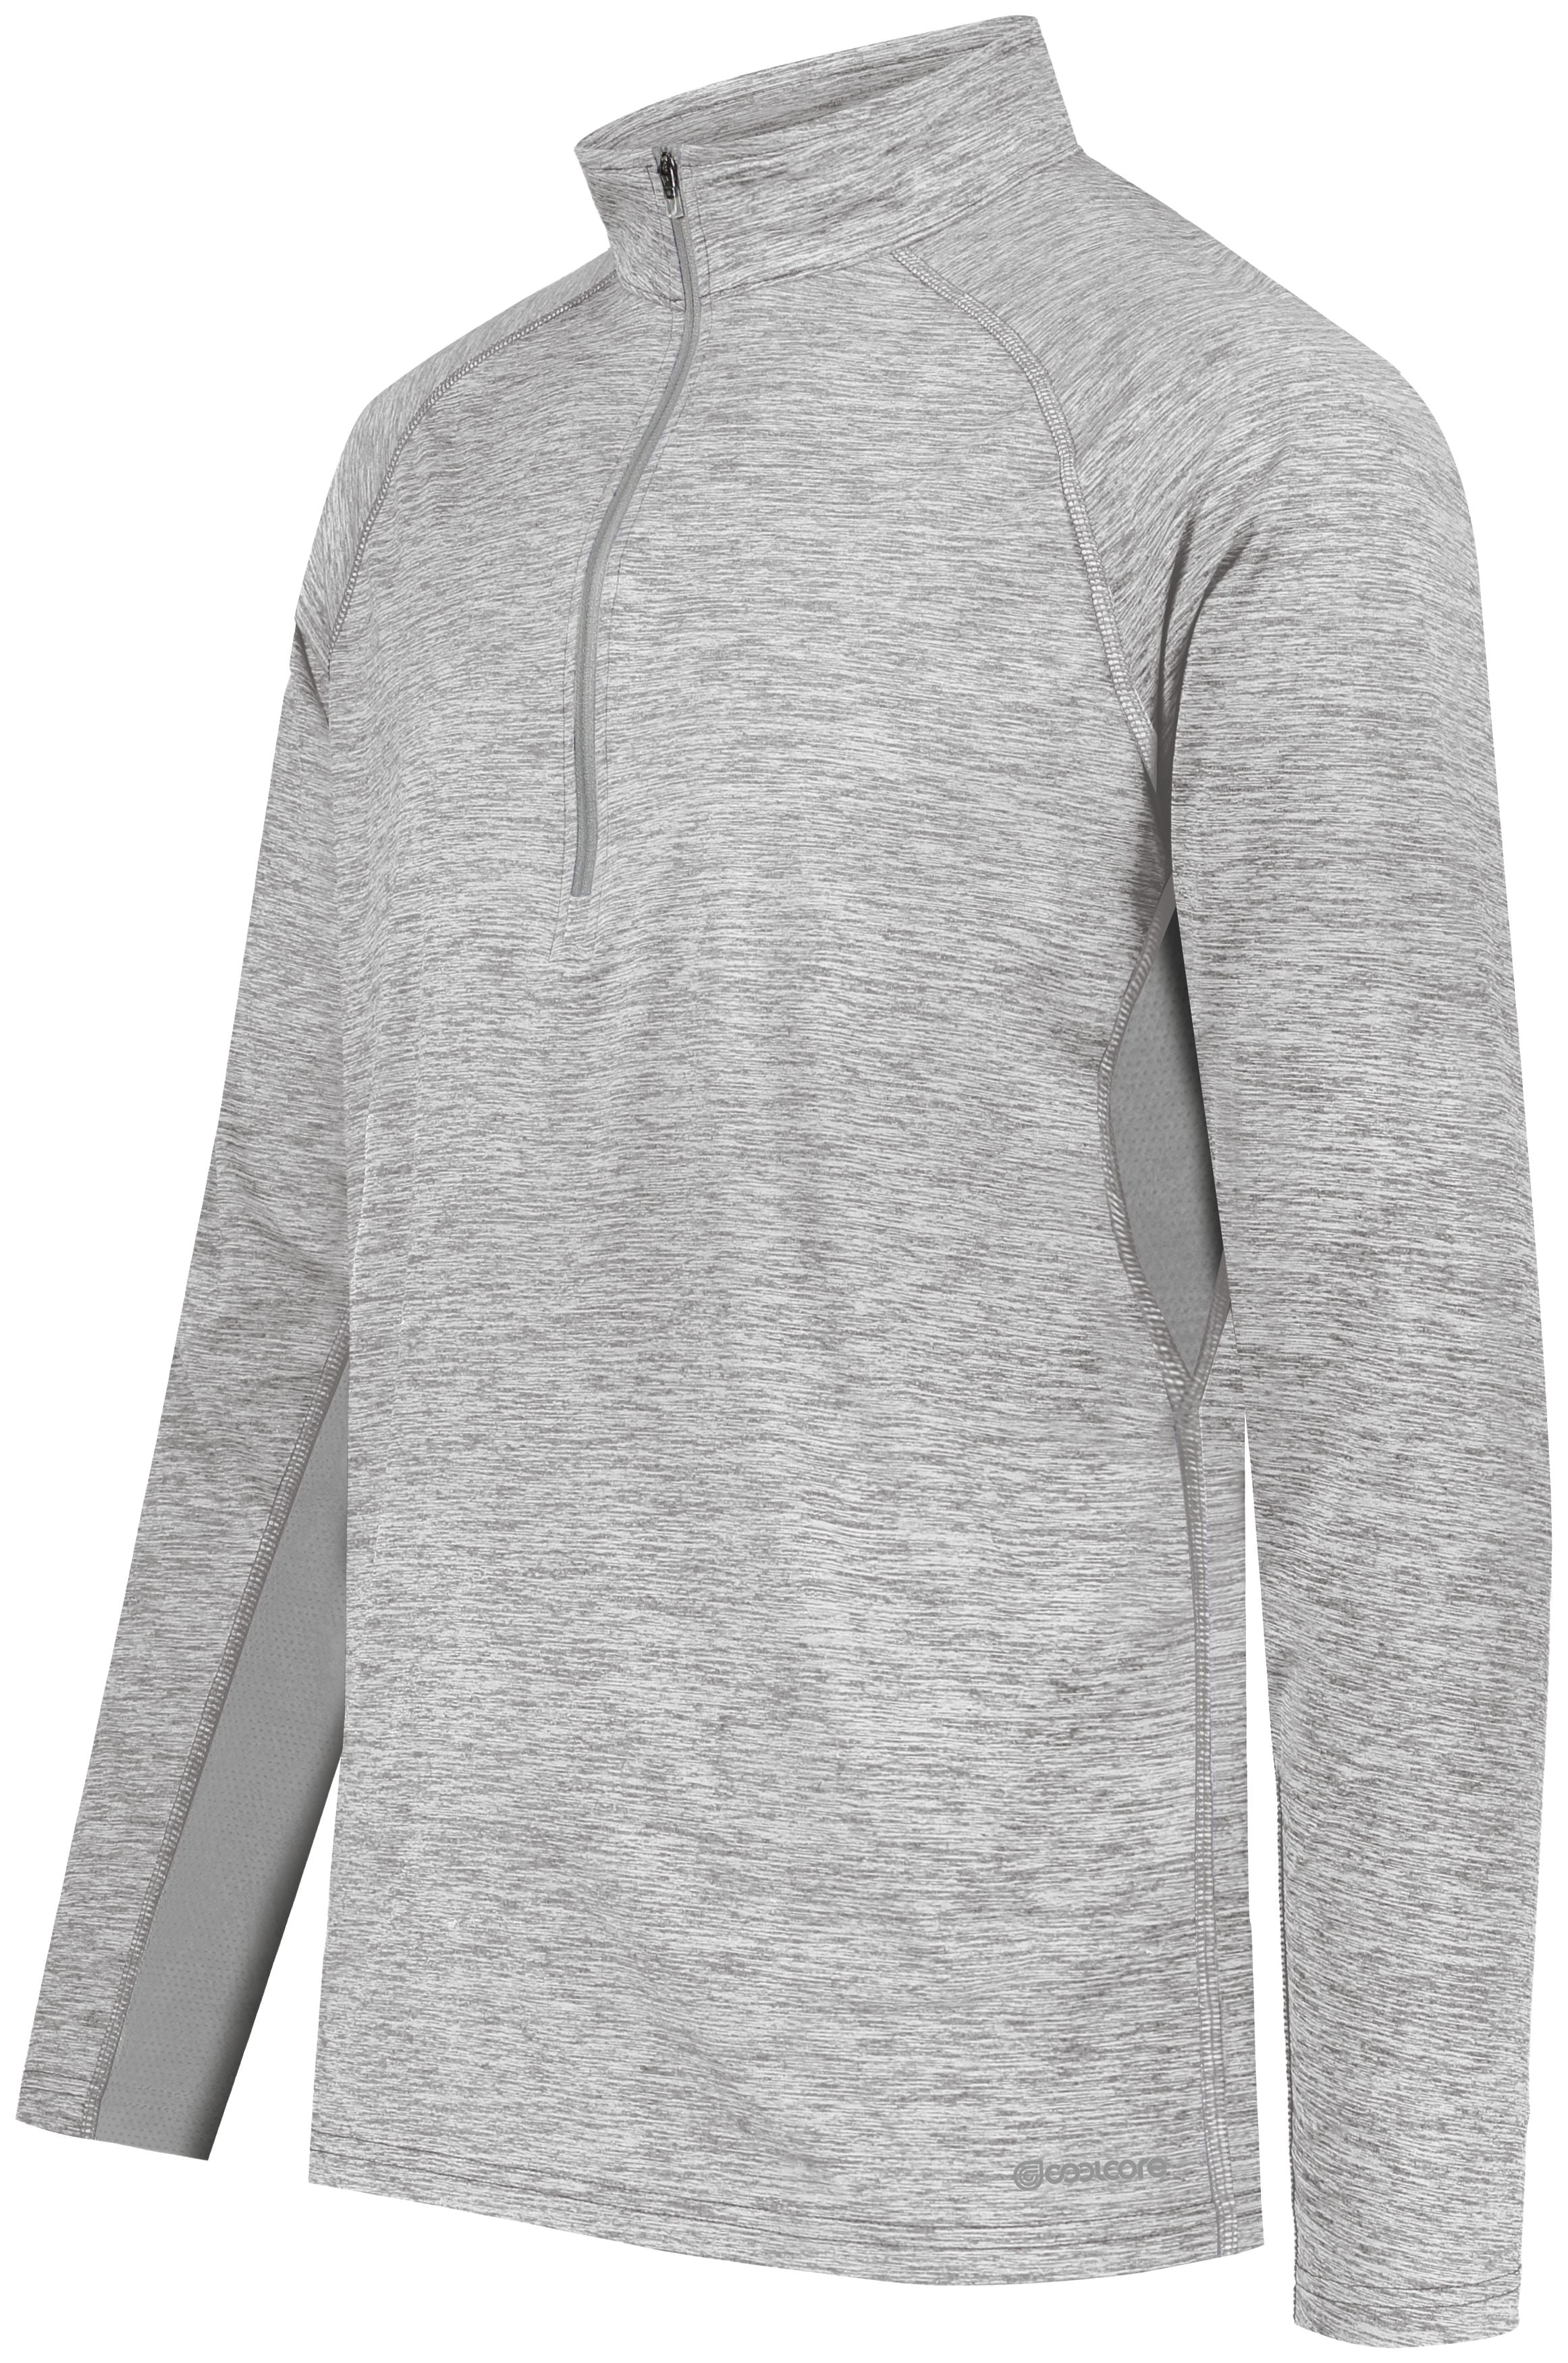 Youth Electrify Coolcore?? 1/2 Zip Pullover 222674